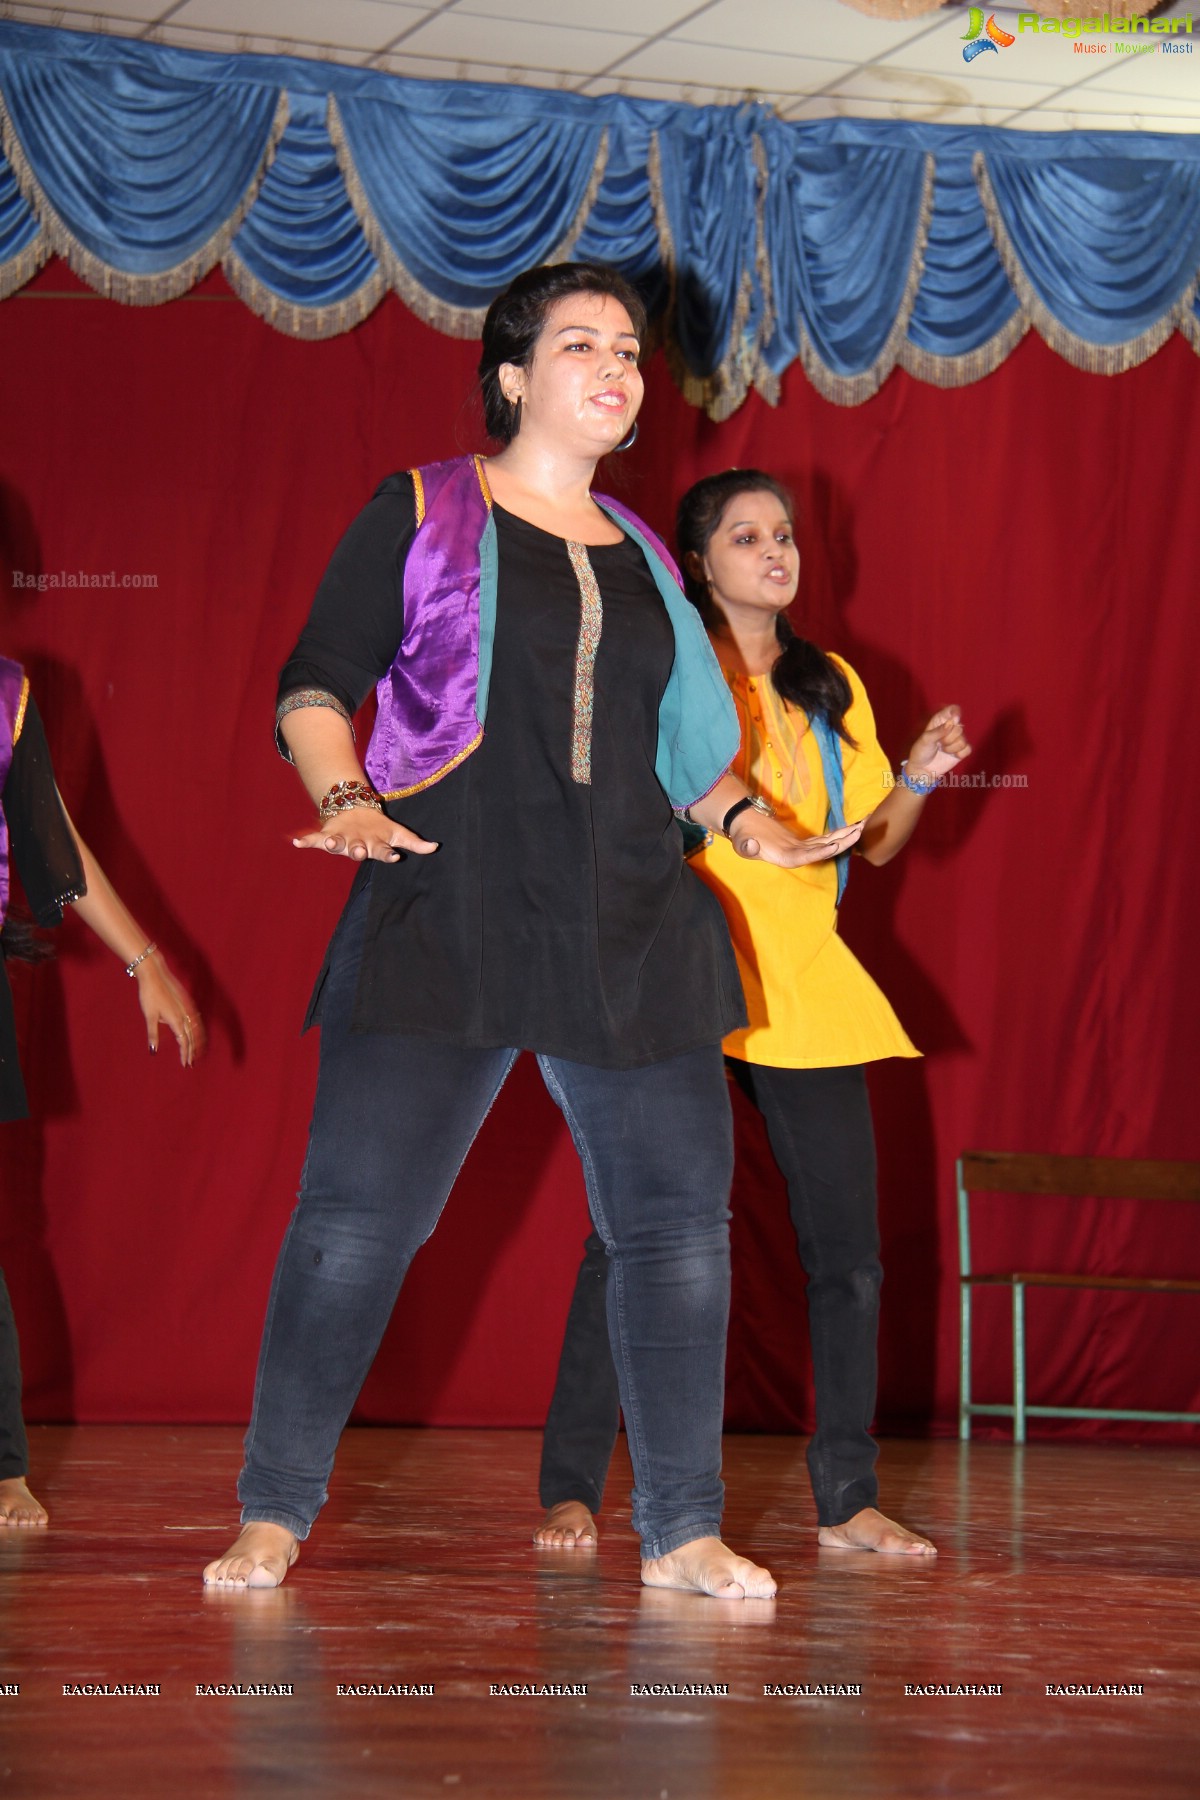 St. Francis College for Women 2013 Freshers Party